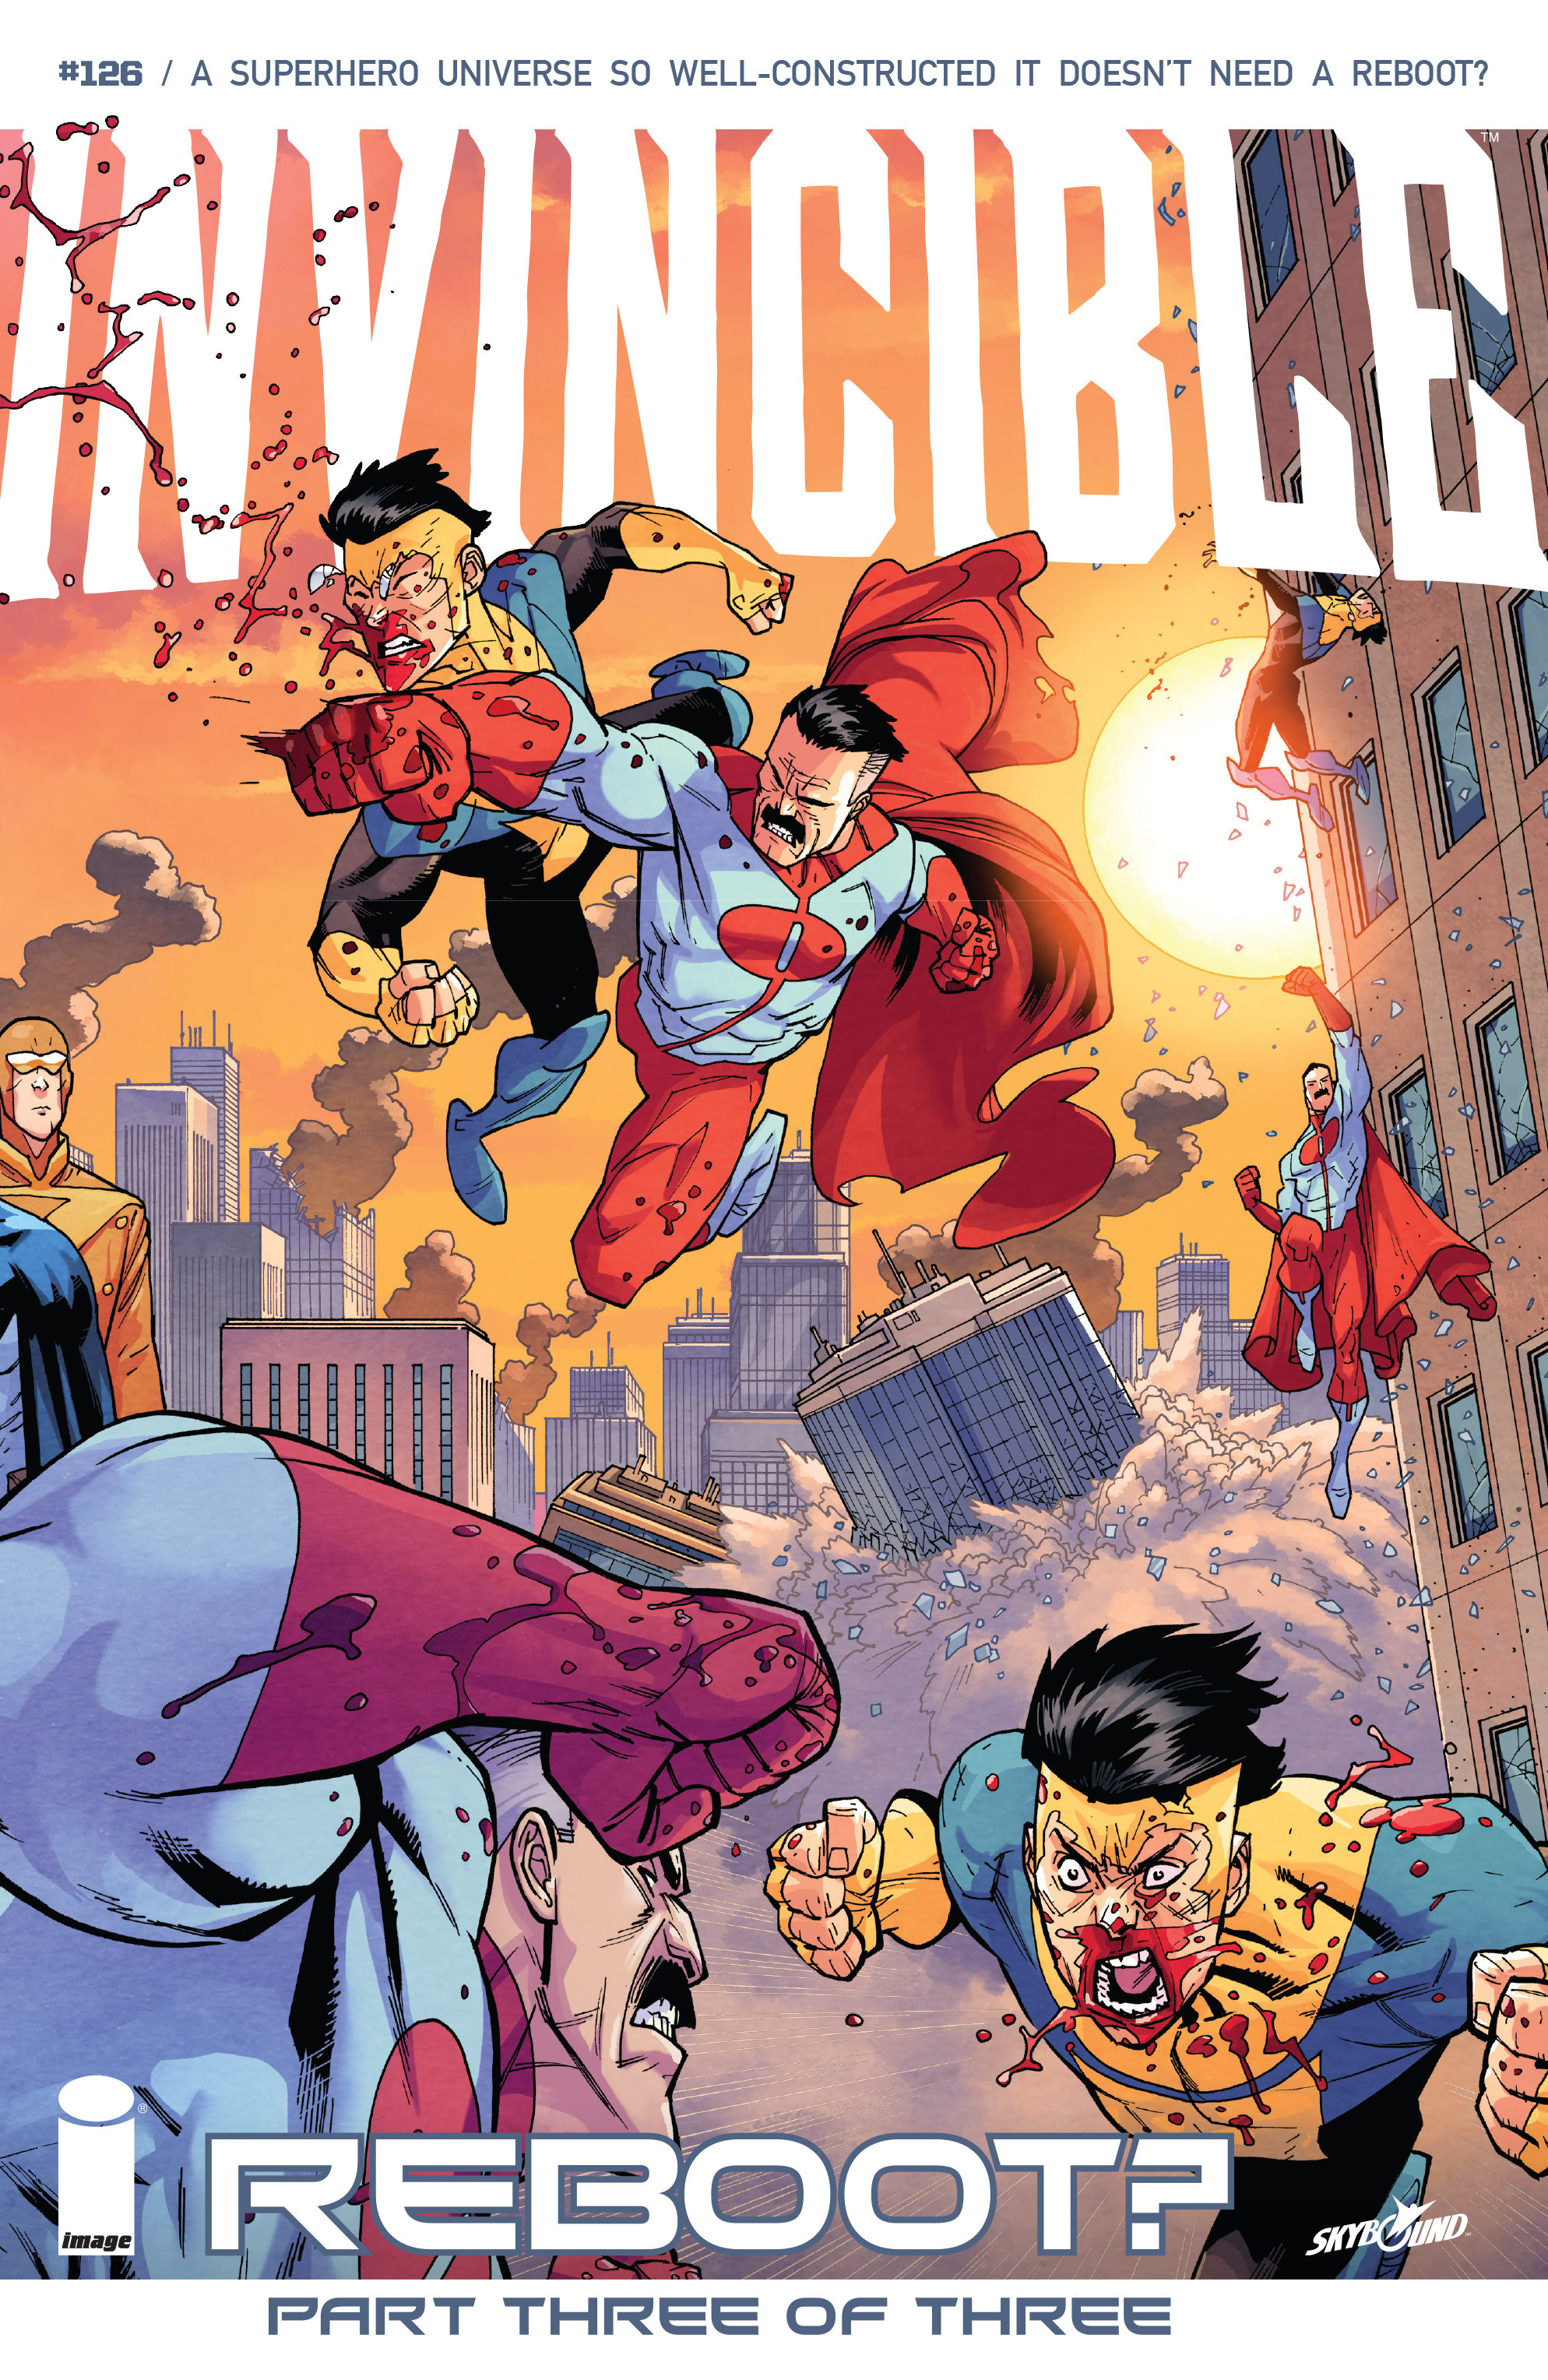 Read online Invincible comic - Issue #126.